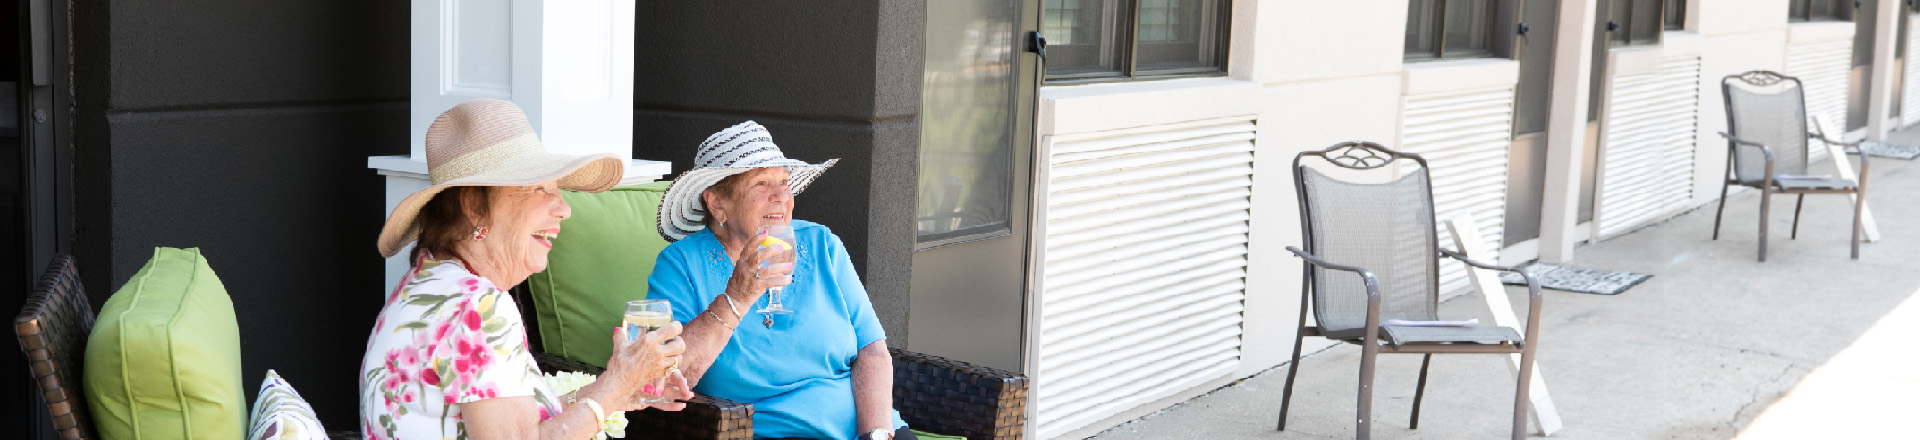 Six Reasons Why Now is a Good Time to Move to a Senior Living Community-1213